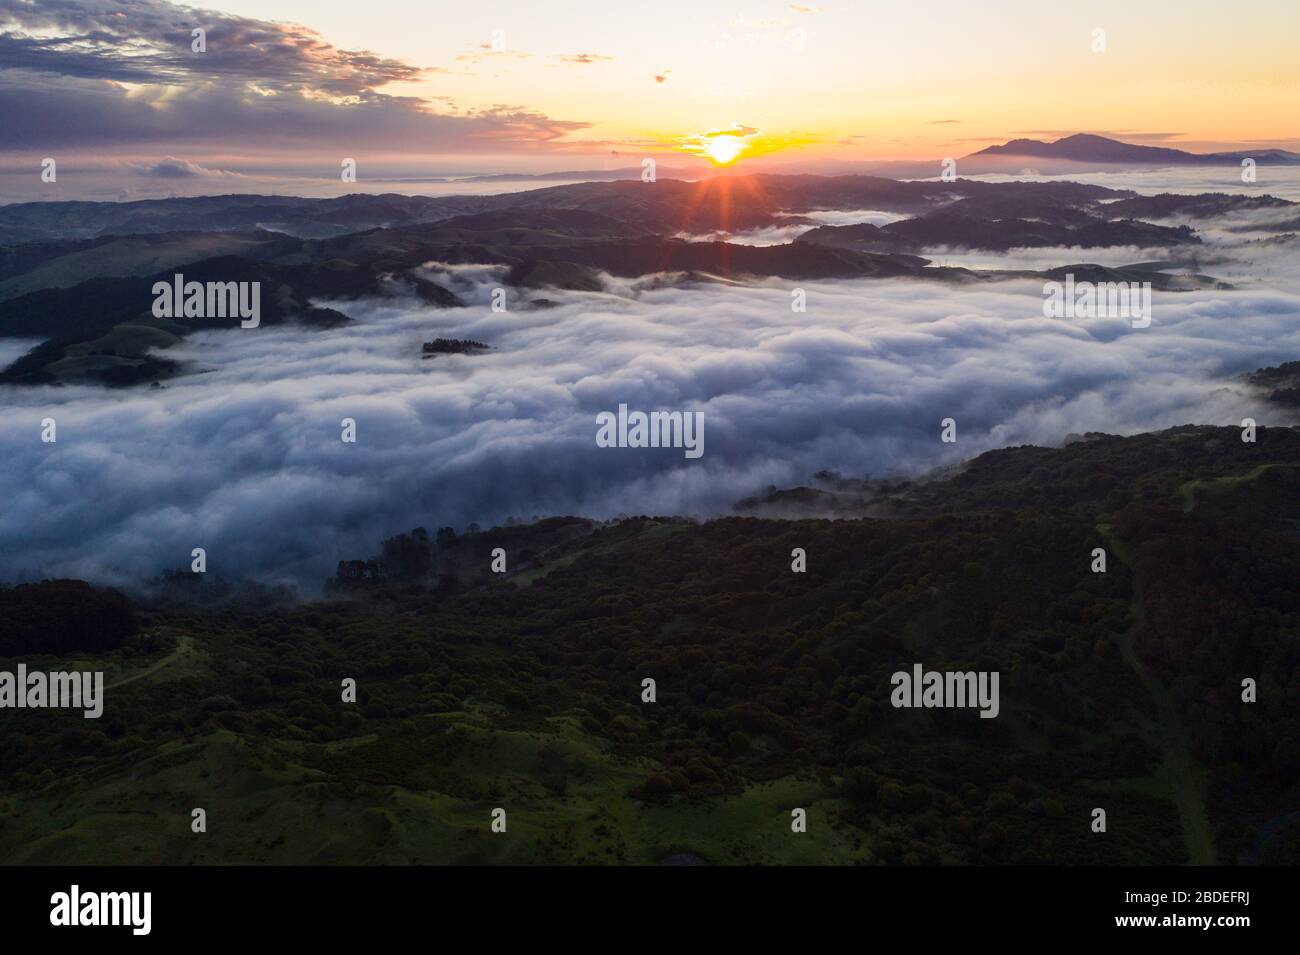 A beautiful sunrise illuminates fog as it rolls through valleys in Northern California. Just west of these hills and valleys is San Francisco Bay. Stock Photo